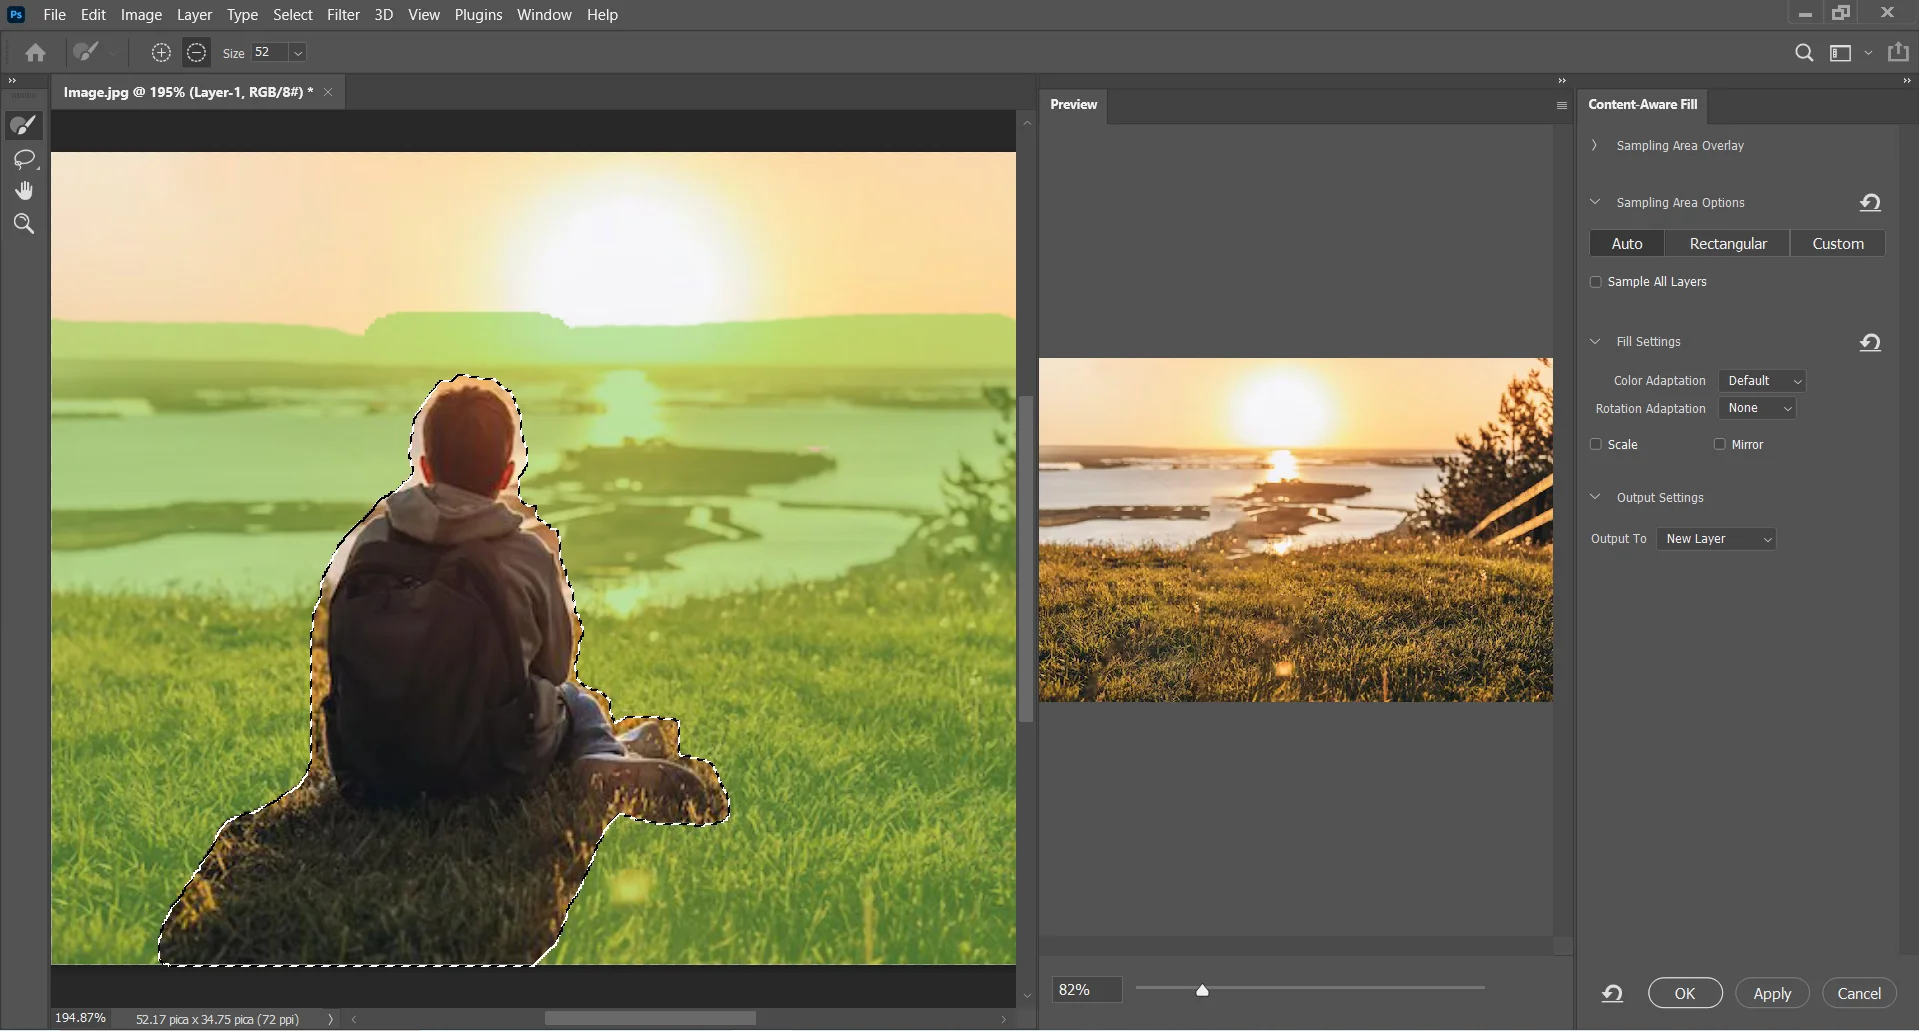 Preview Panel in Photoshop